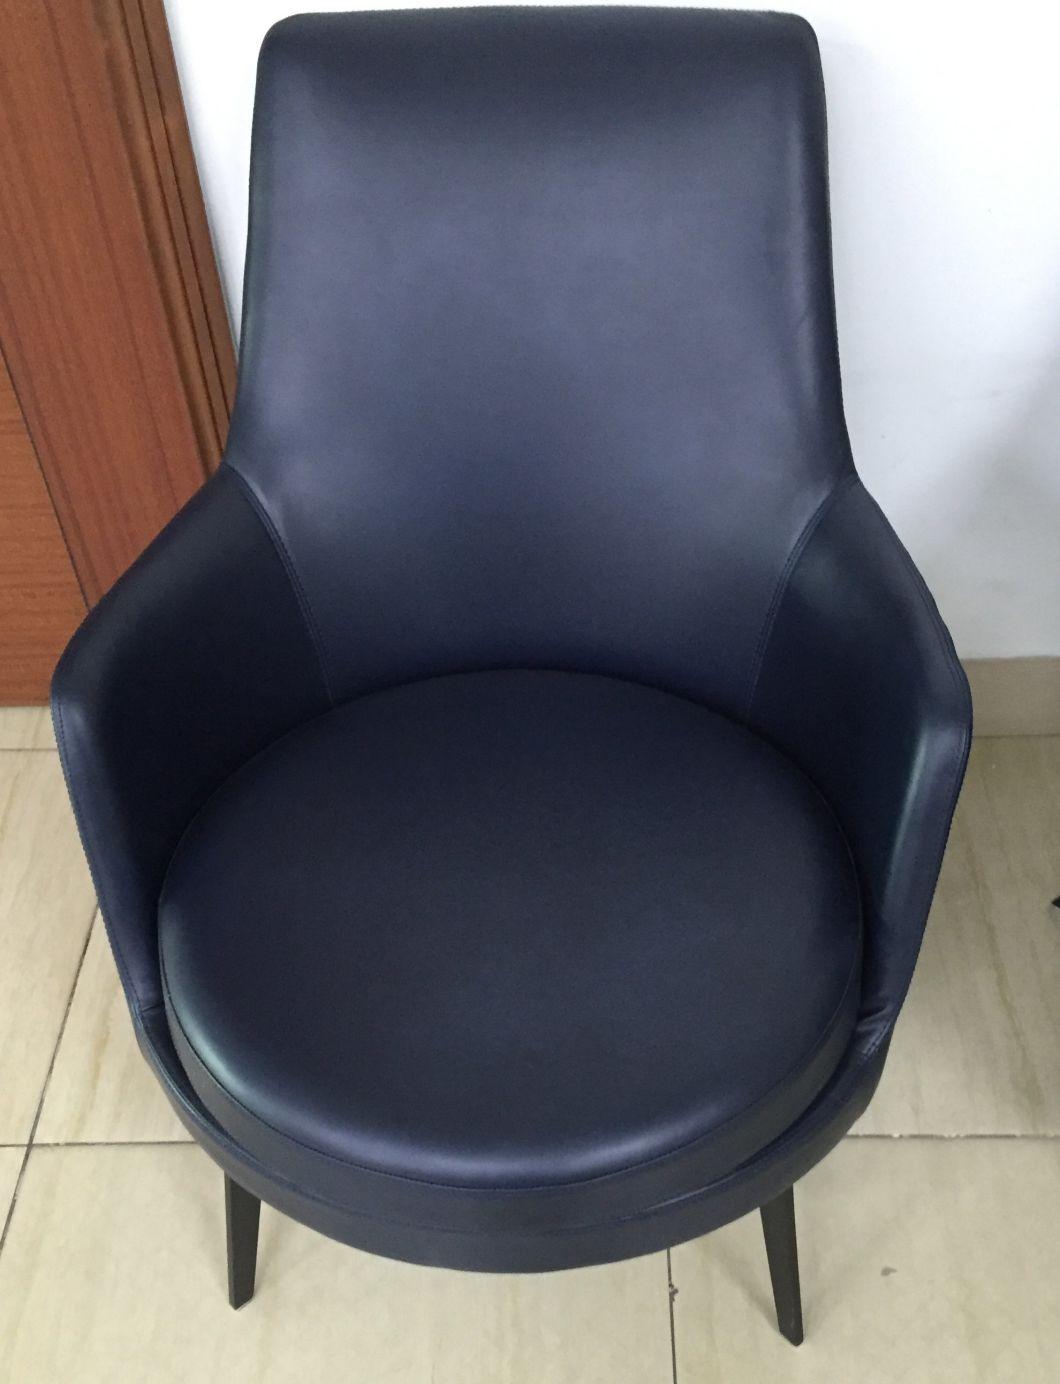 2019 Light Luxury Casual Waiting Zone Single Seater Chair